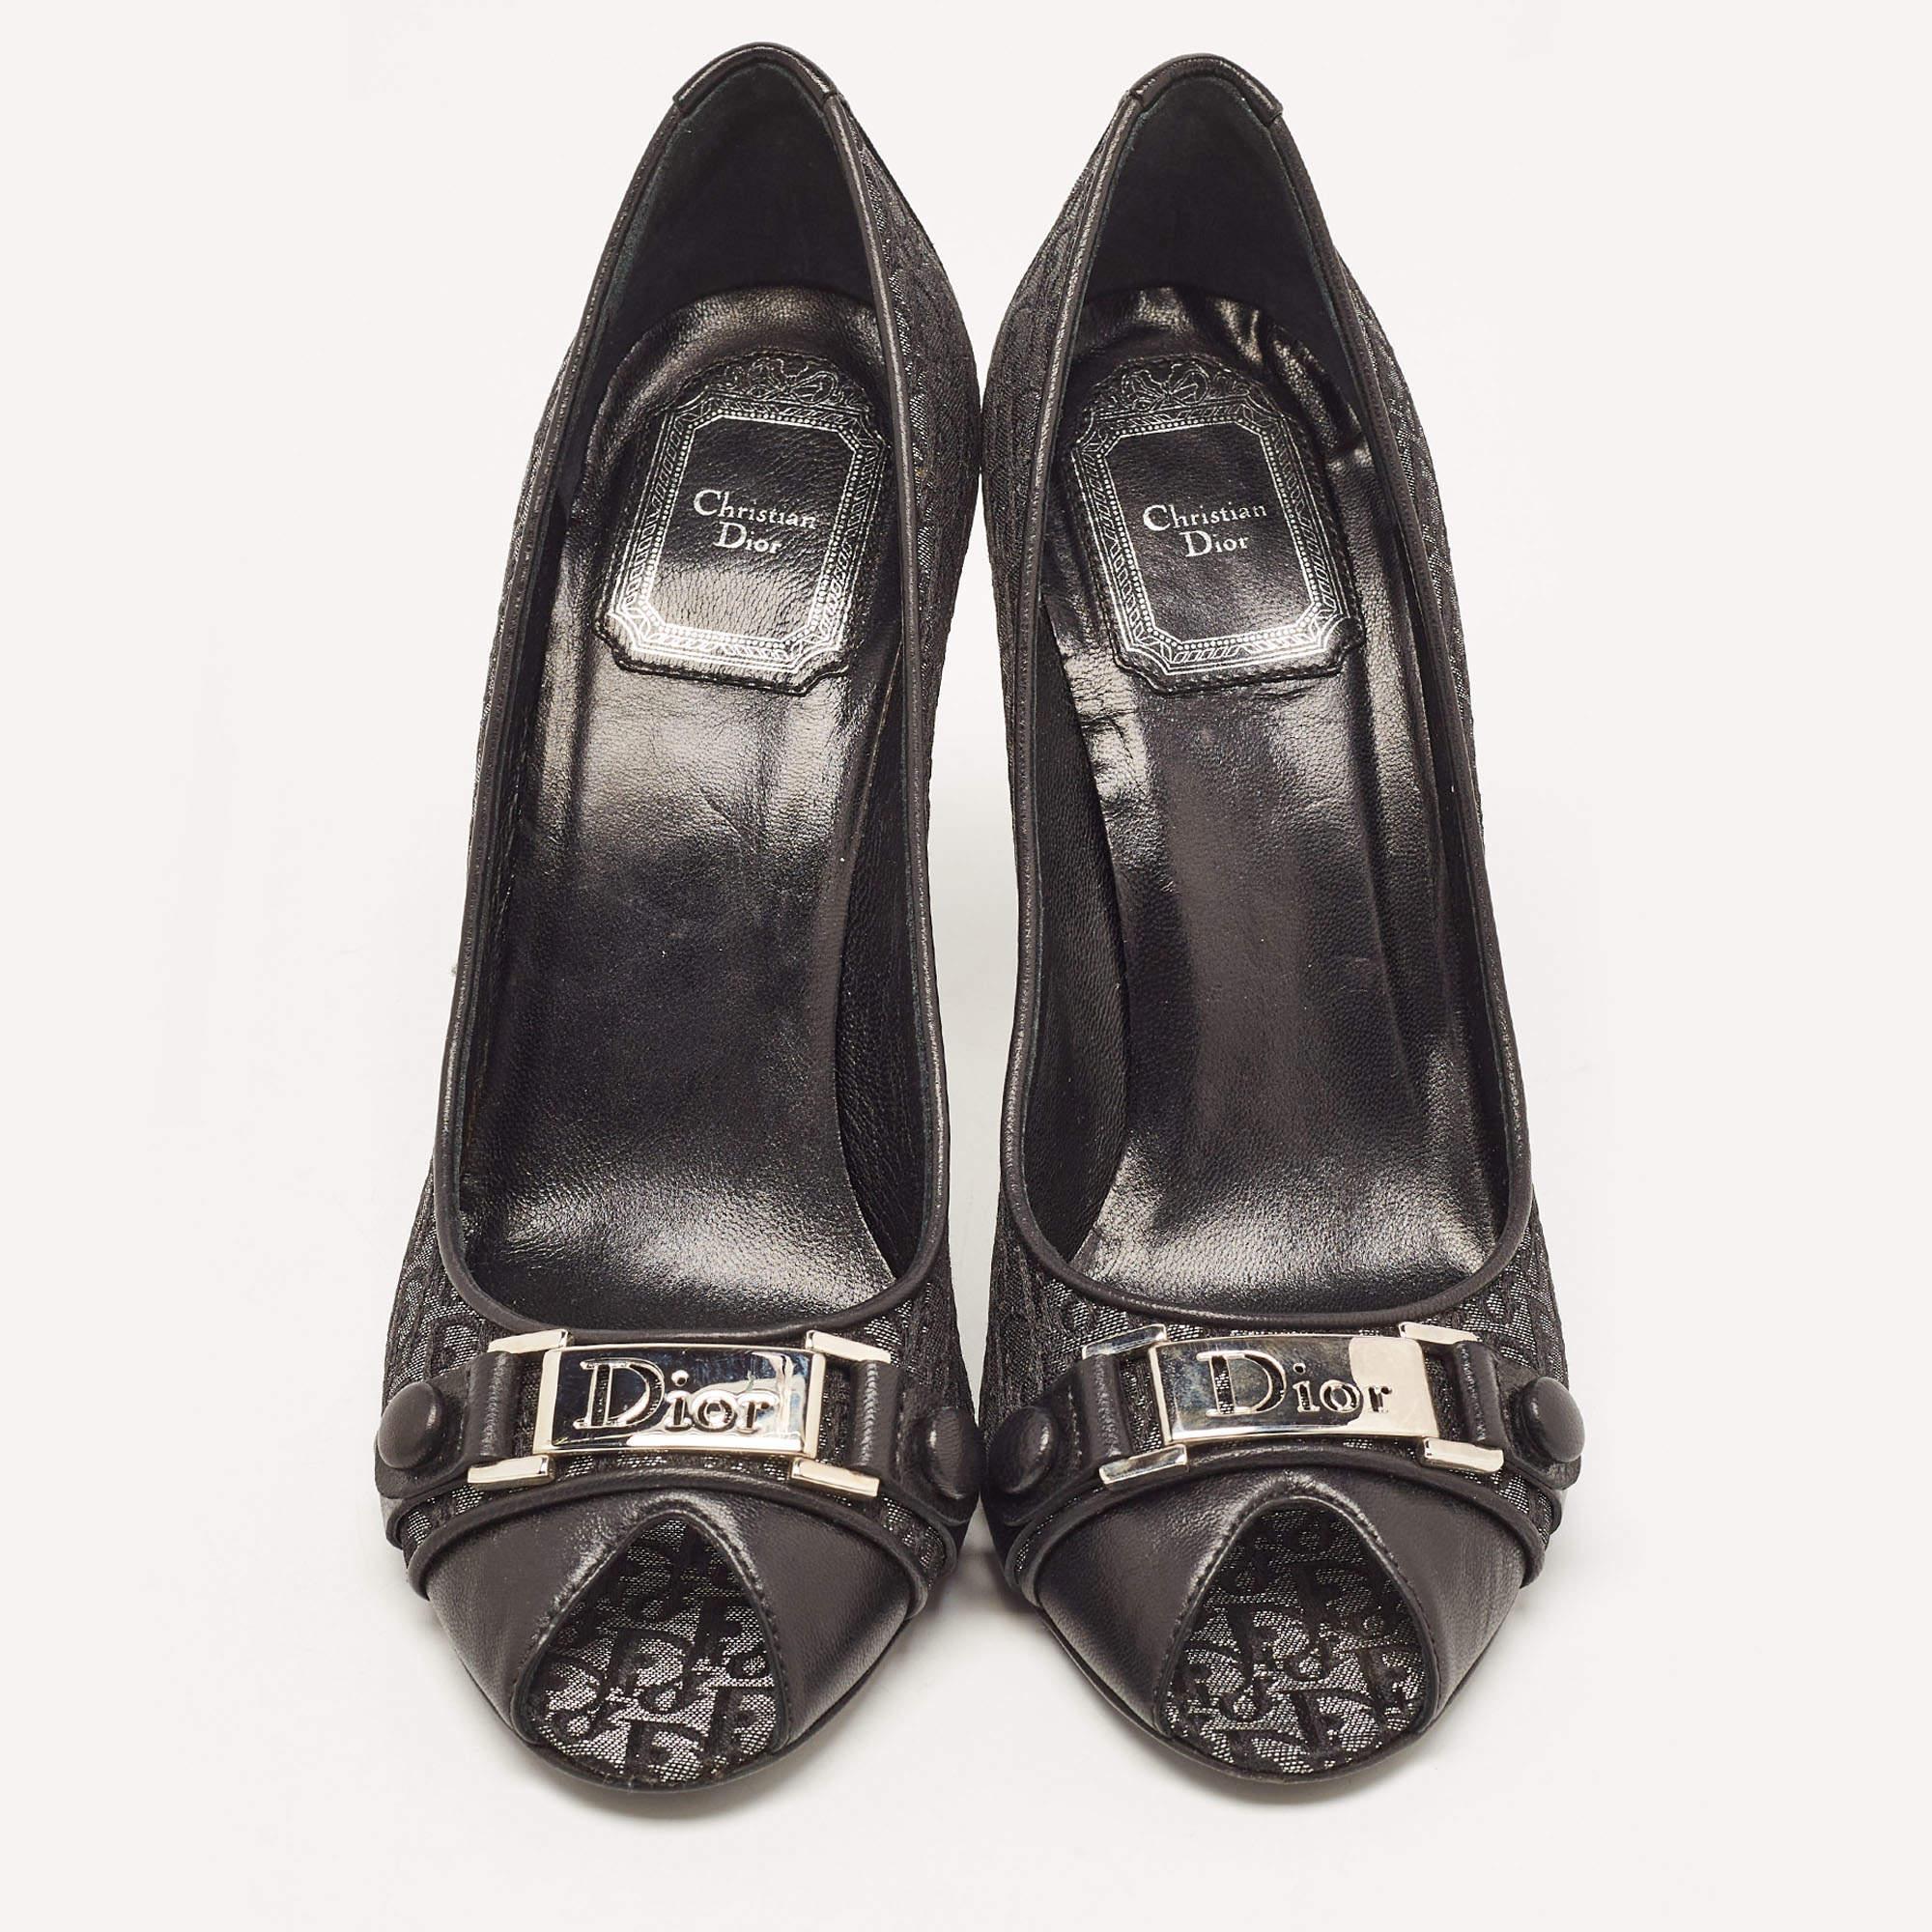 Get an elegant look with these pumps by Dior. Beautifully designed, they flaunt peep toes and comfortable heels. Strike the right pose by assembling the pair with a dress or jumpsuit.

Includes: Original Box